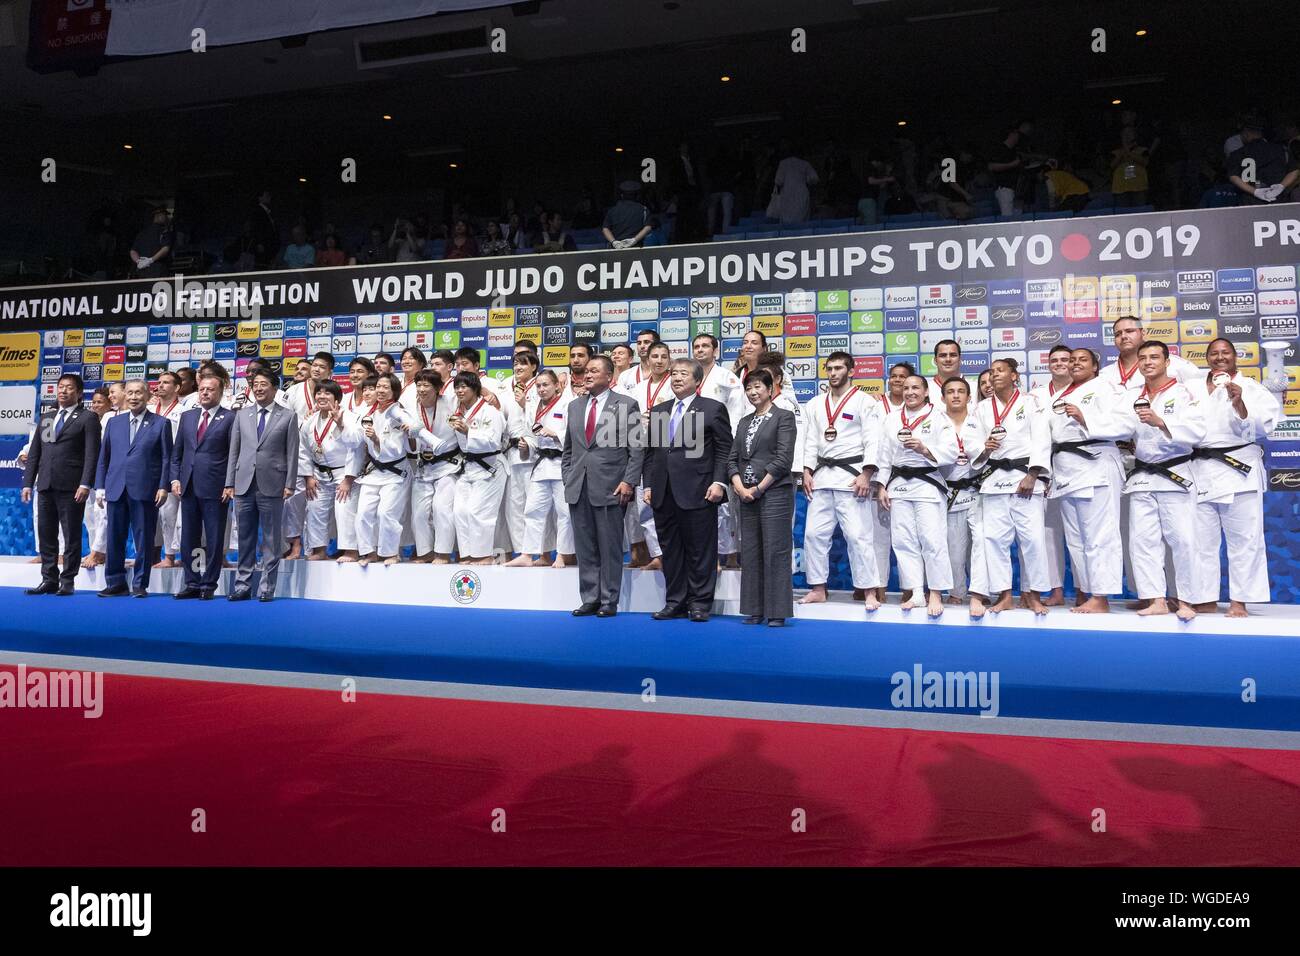 Tokyo, Japan. 1st Sep, 2019. (First line) Japanese Prime Minister Shinzo Abe (C-L), Tokyo Governor Yuriko Koike (R) and Tokyo 2020 Olympic President Yoshiro Mori (2nd - L) pose for the cameras with (2nd Line from L) silver medalists France team, gold medalists Japan team, bronze medalists Russia team and Brazil team, pose for the cameras during the award ceremony for the Mixed Team competition at the World Judo Championships Tokyo 2019 in the Nippon Budokan. The World Judo Championships Tokyo 2019 is held from August 25 to September 1st. Credit: Rodrigo Reyes Marin/ZUMA Wire/Alamy Live News Stock Photo